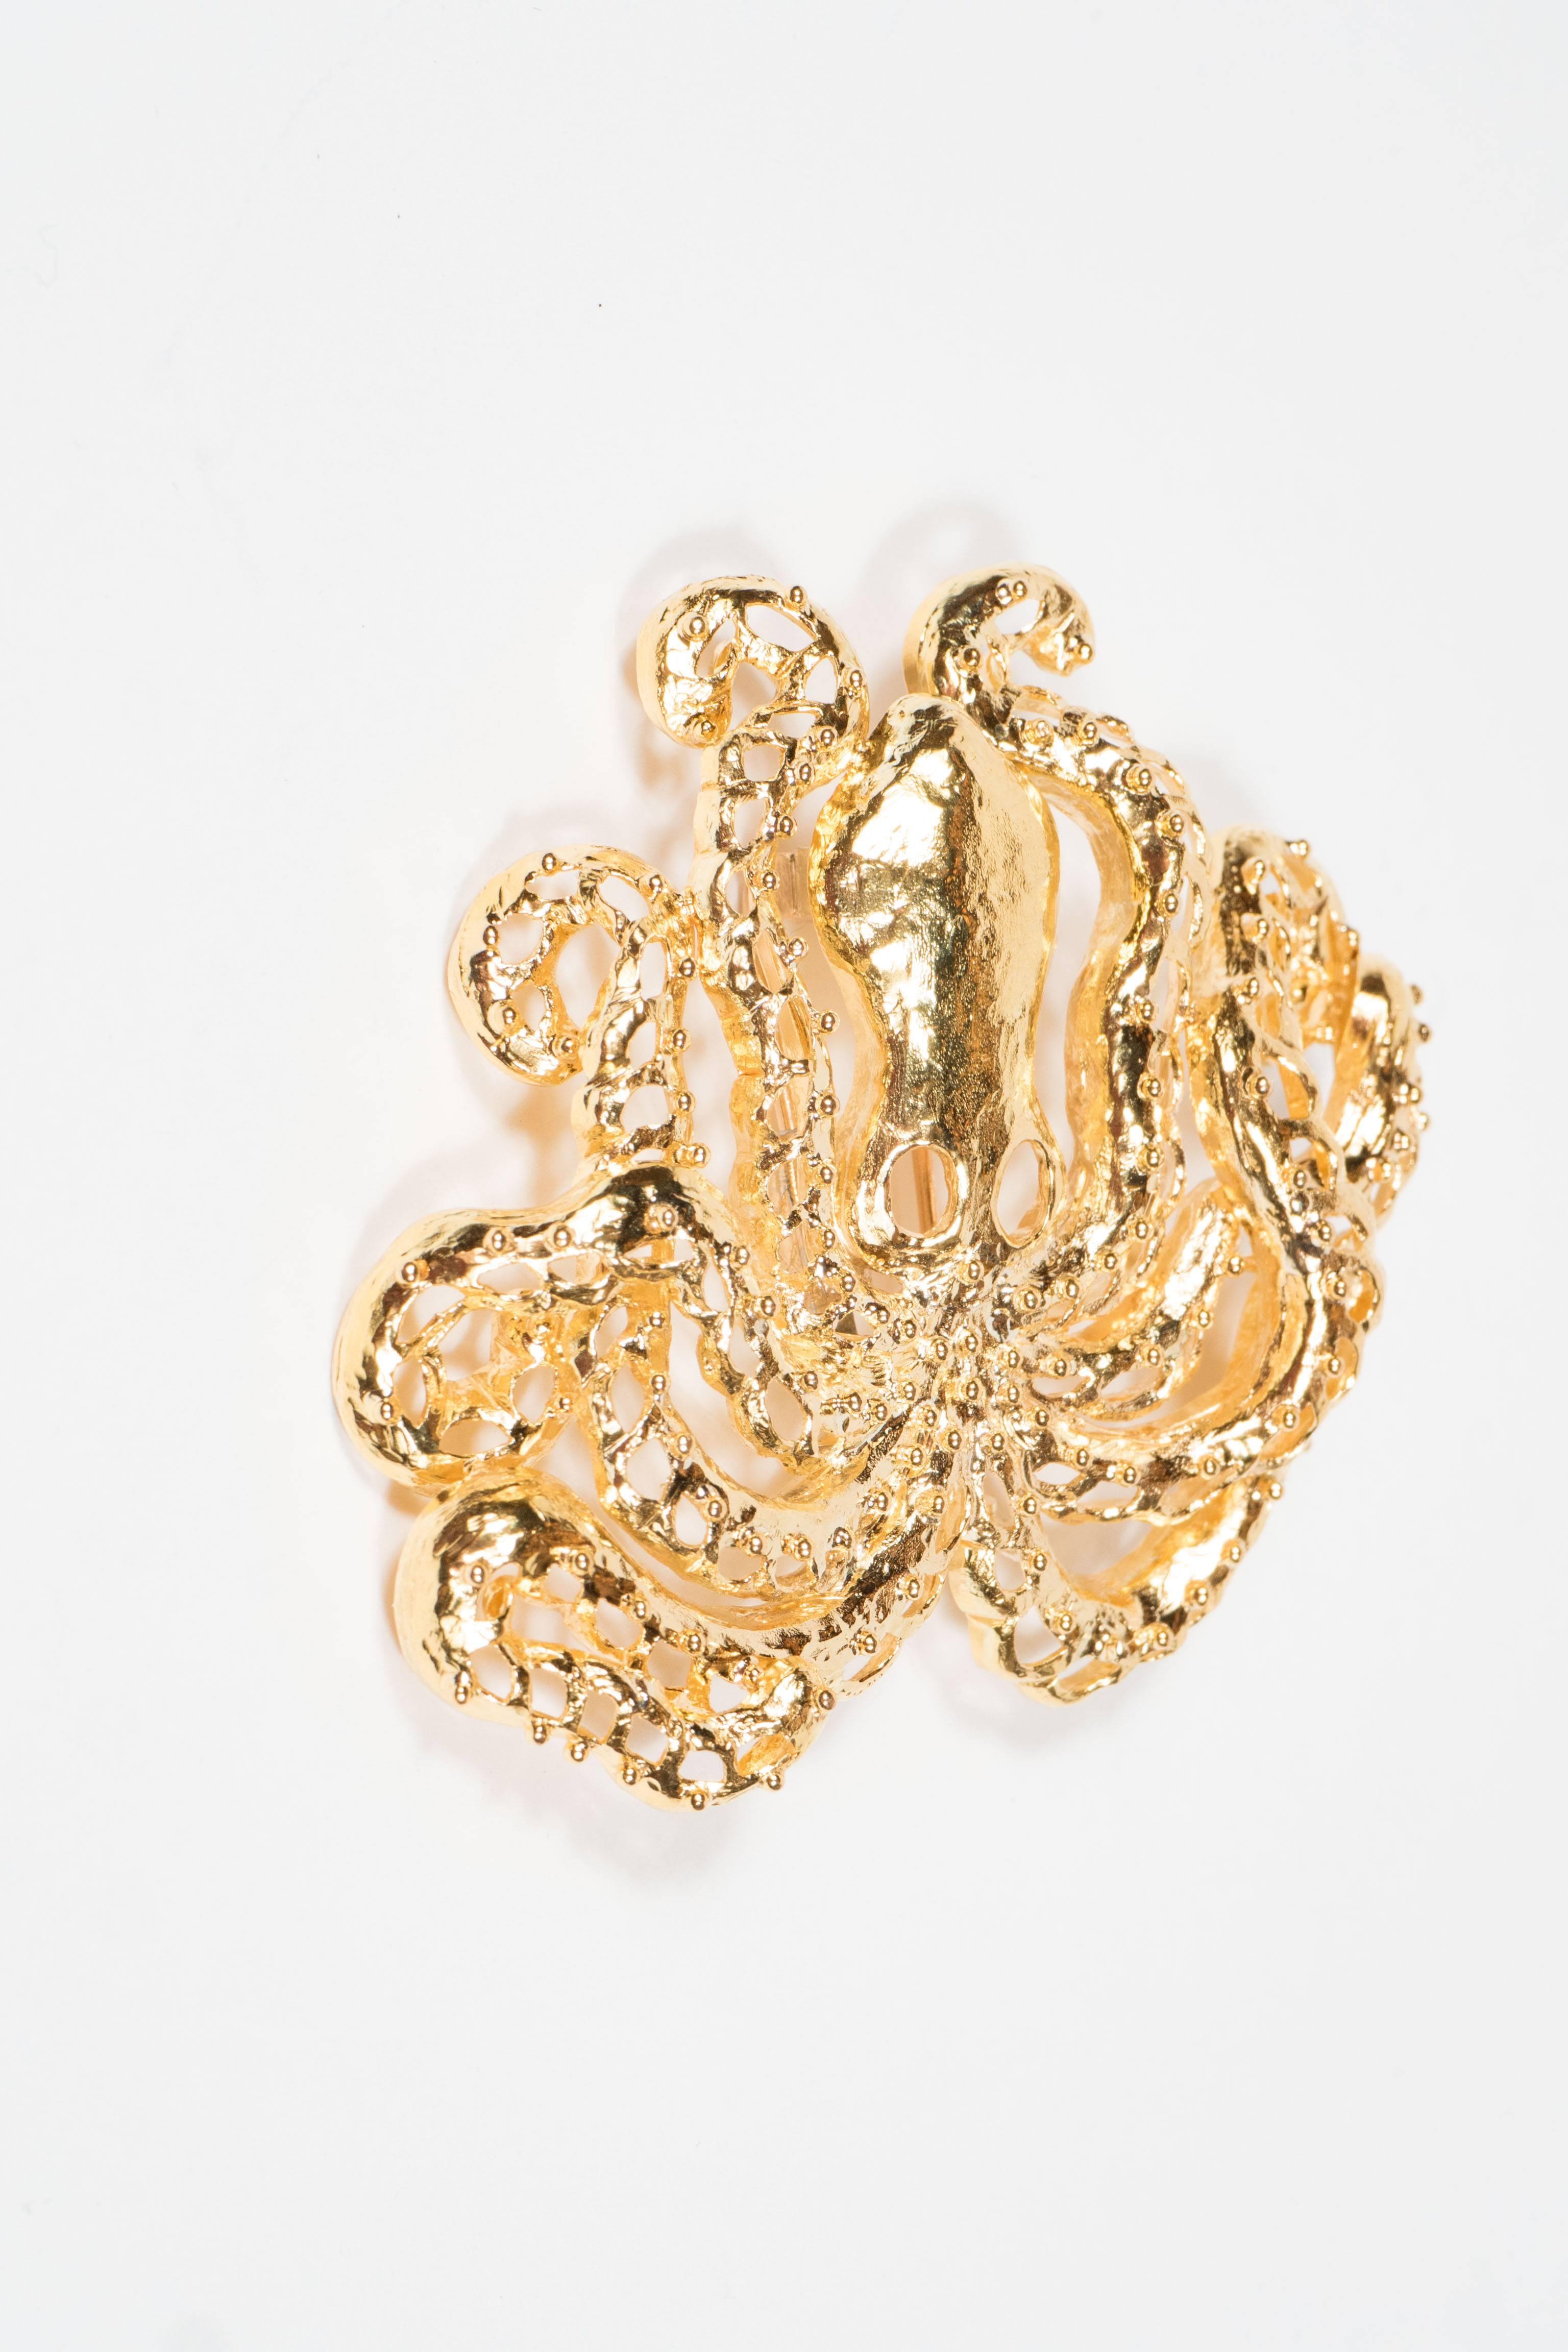 Modernist Sophisticated Mid-Century Gold Octopus Brooch